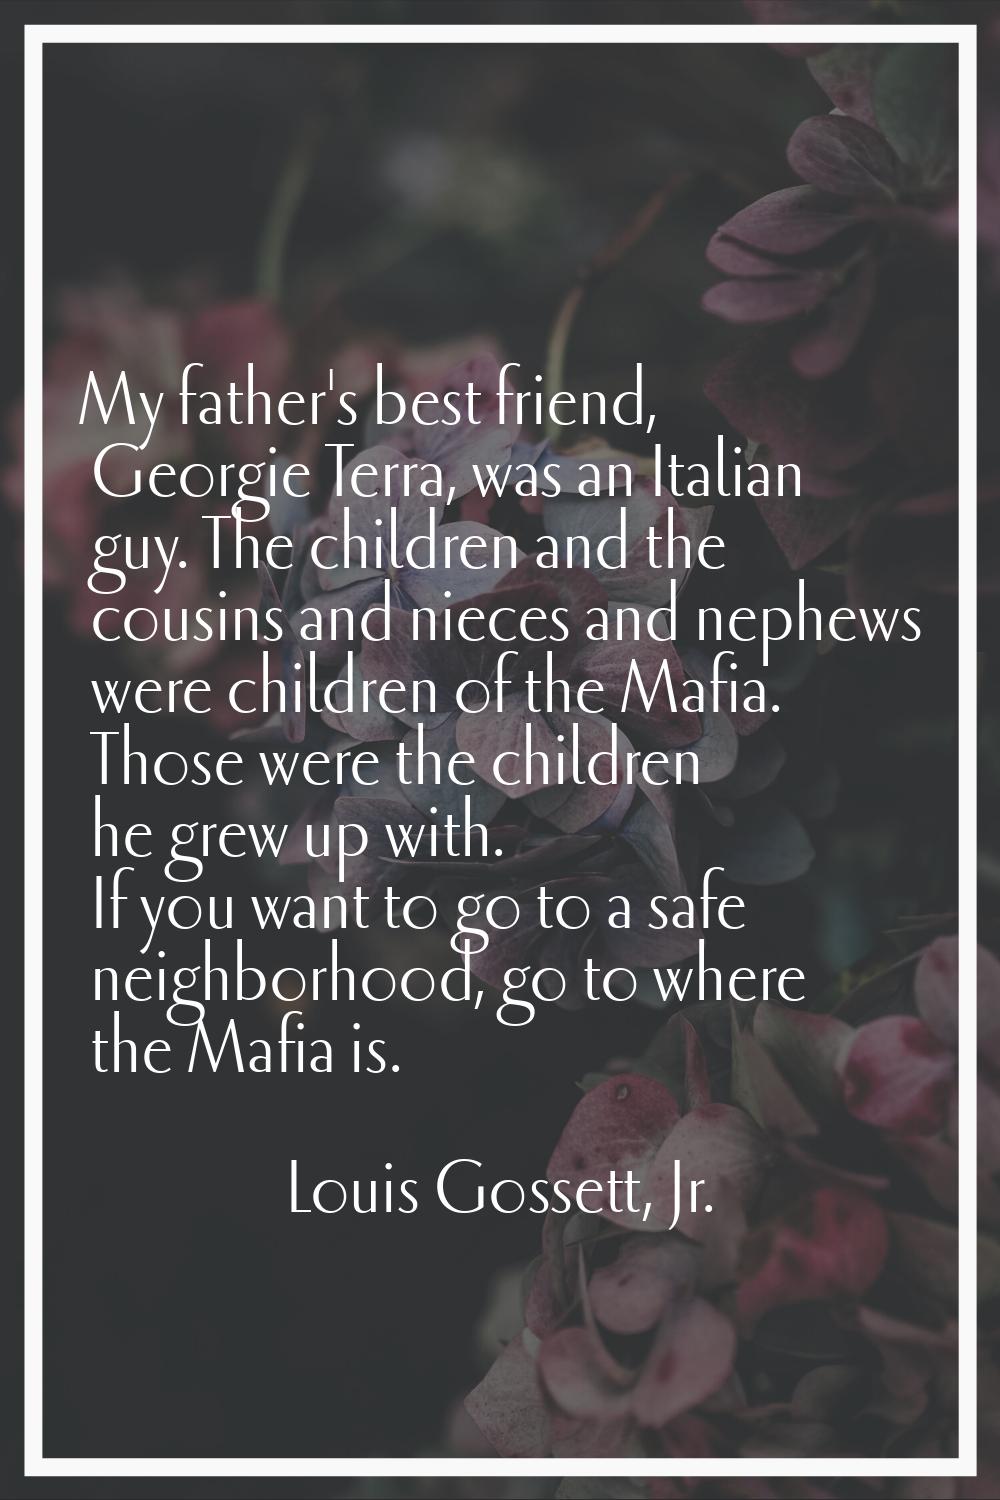 My father's best friend, Georgie Terra, was an Italian guy. The children and the cousins and nieces